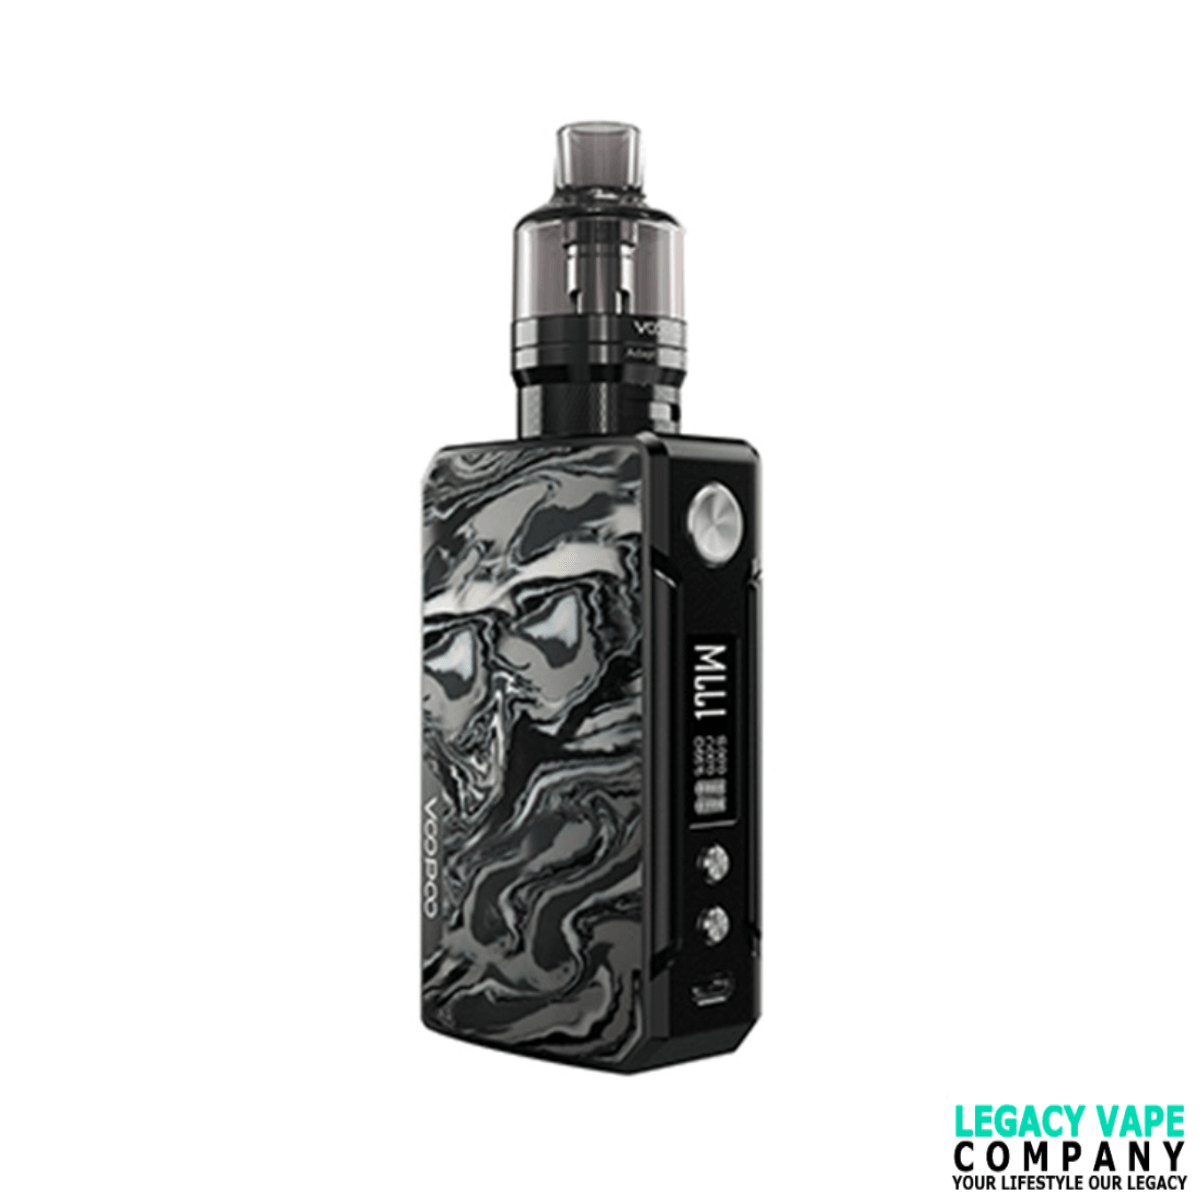 Voopoo Drag 2 Mod Kit With PnP Pod Tank Atomizer 4.5ml (Refresh Edition) Black and white